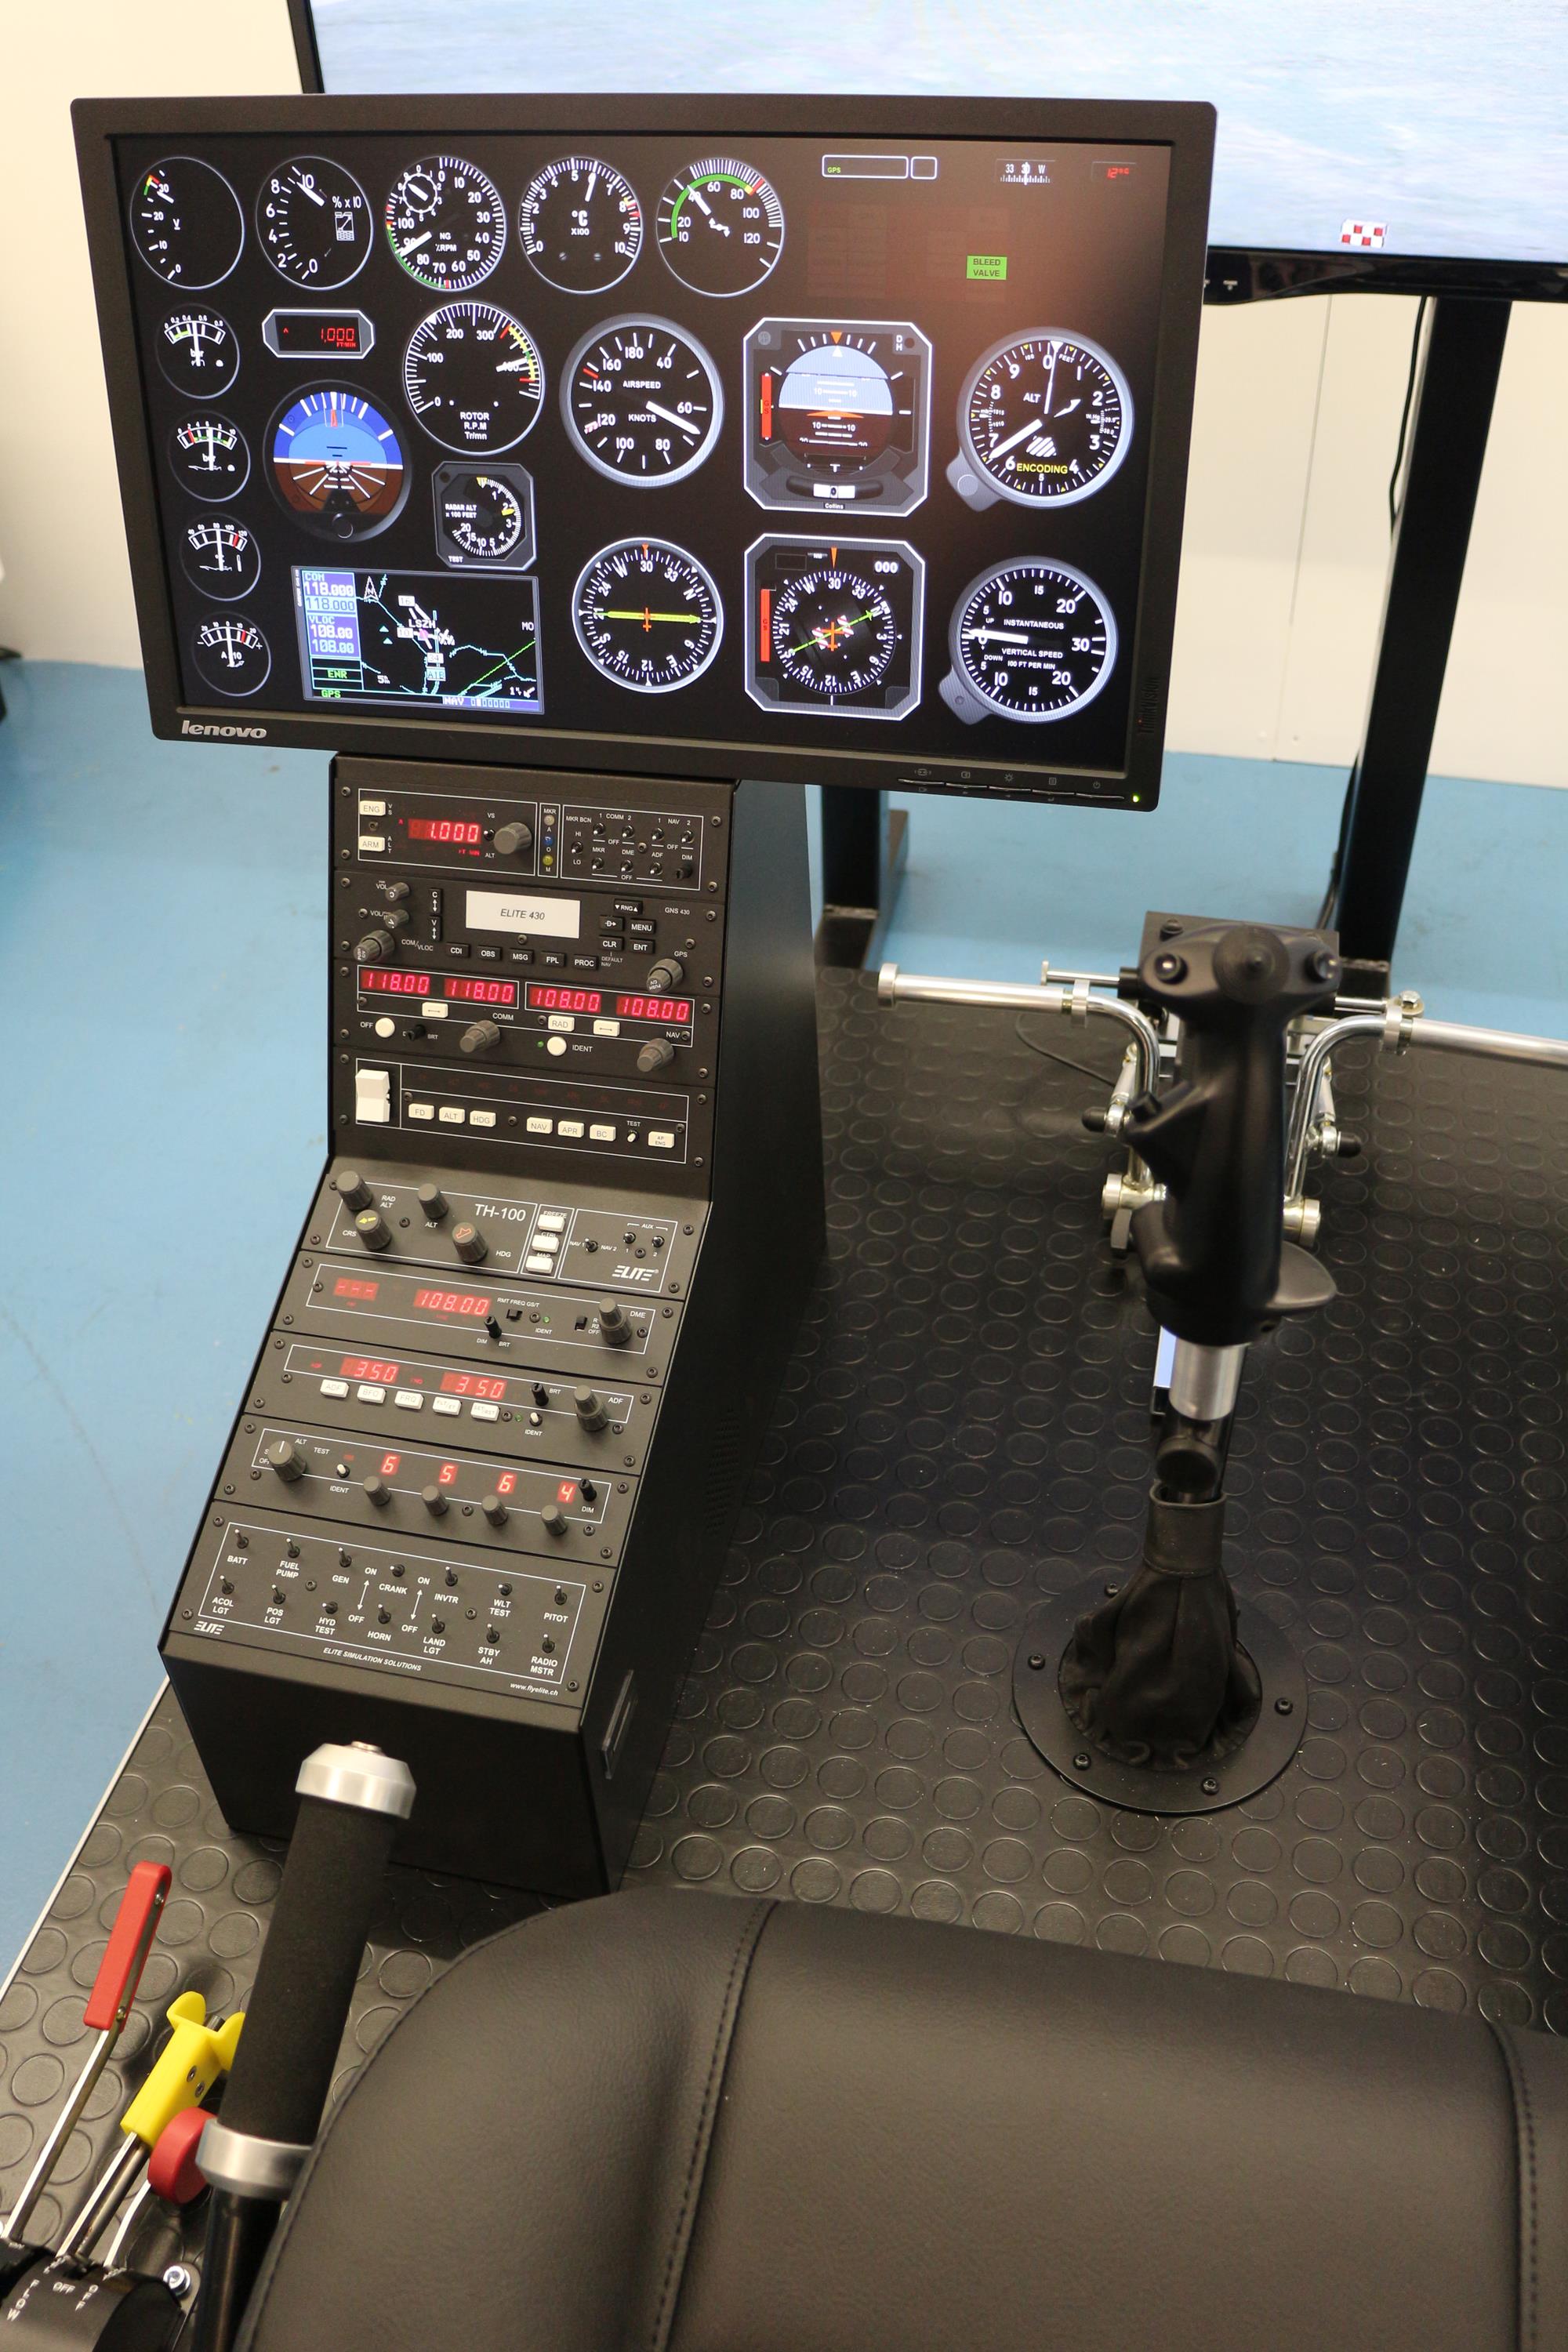 Complete Helicopter Flight Control Unit